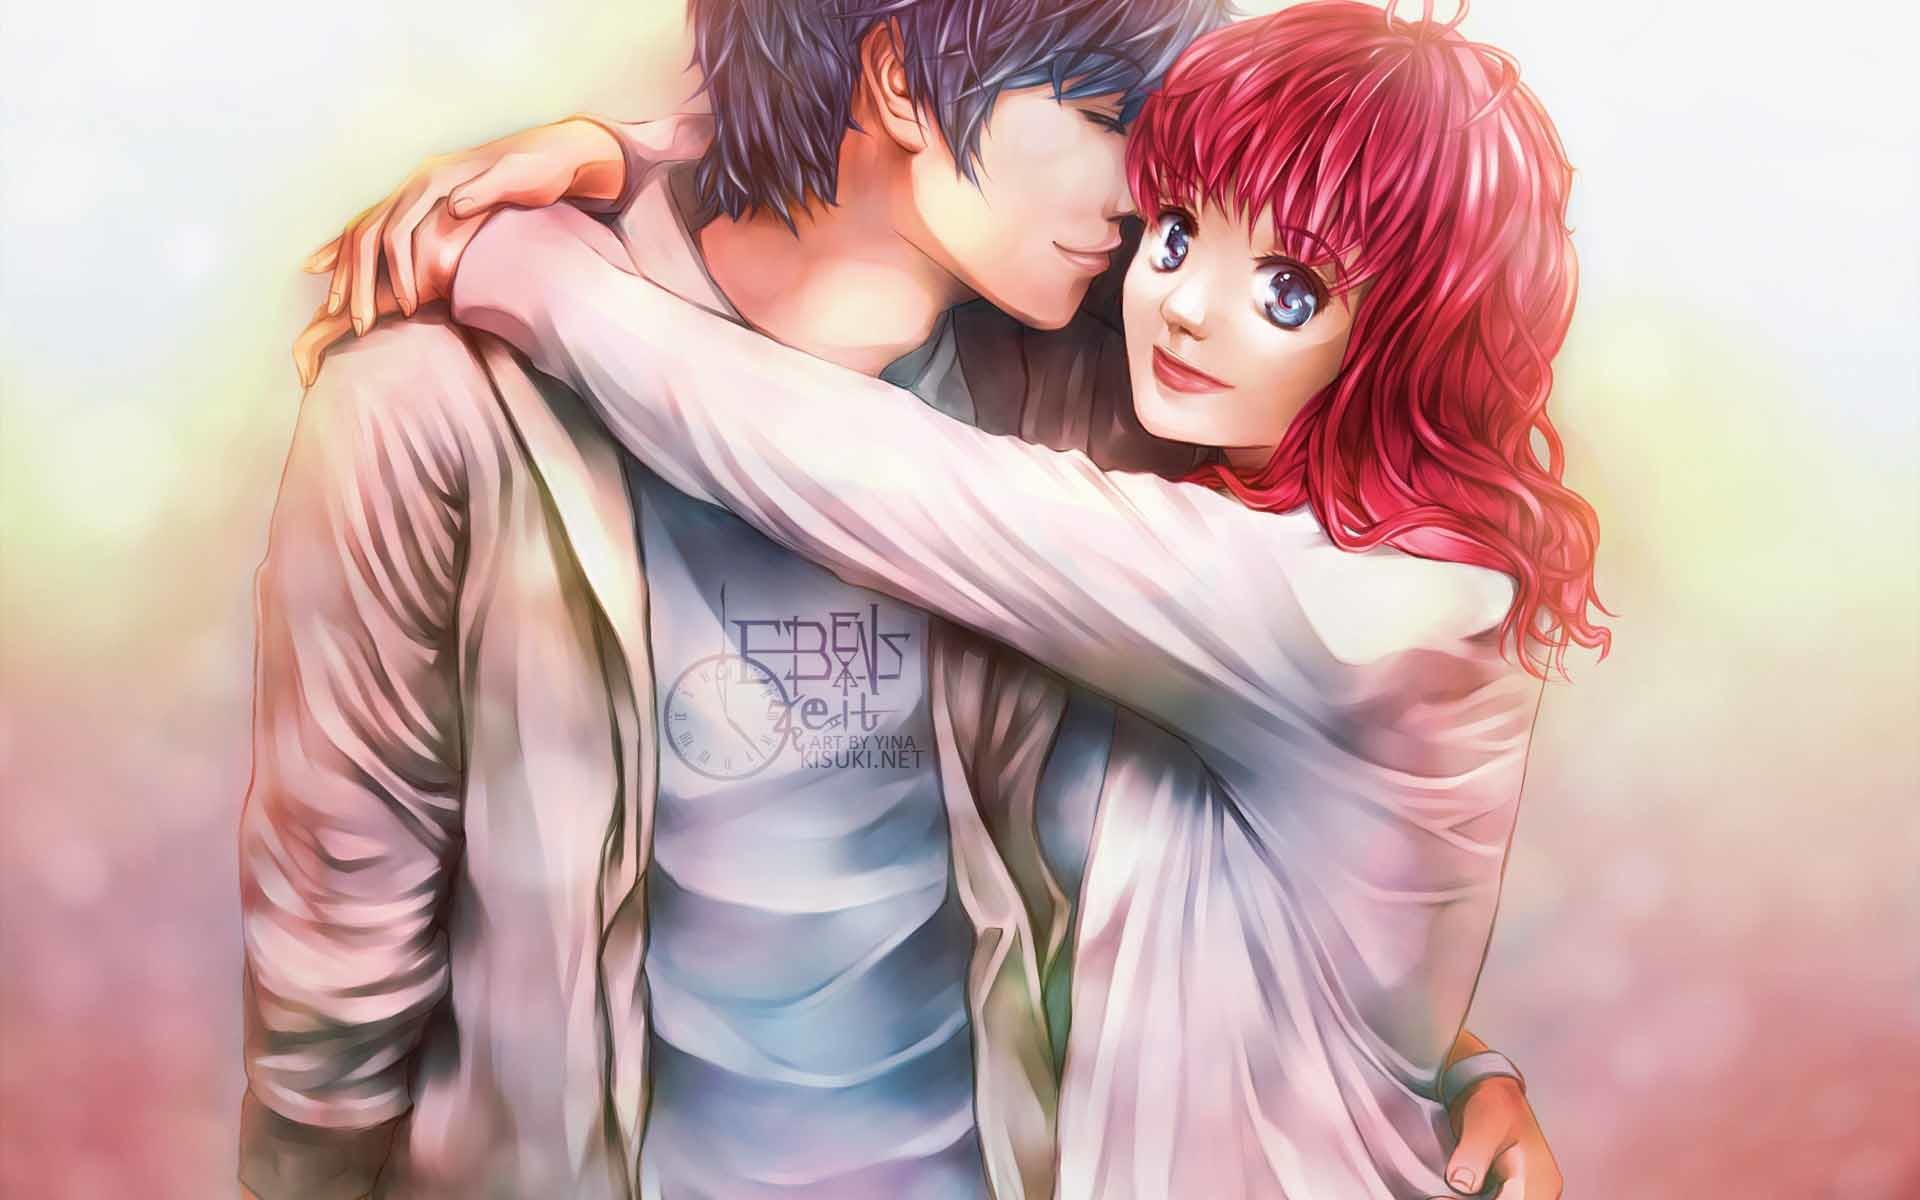 1920x1200 Romantic Anime Couple Hug 3D Wallpapers Collection Pack